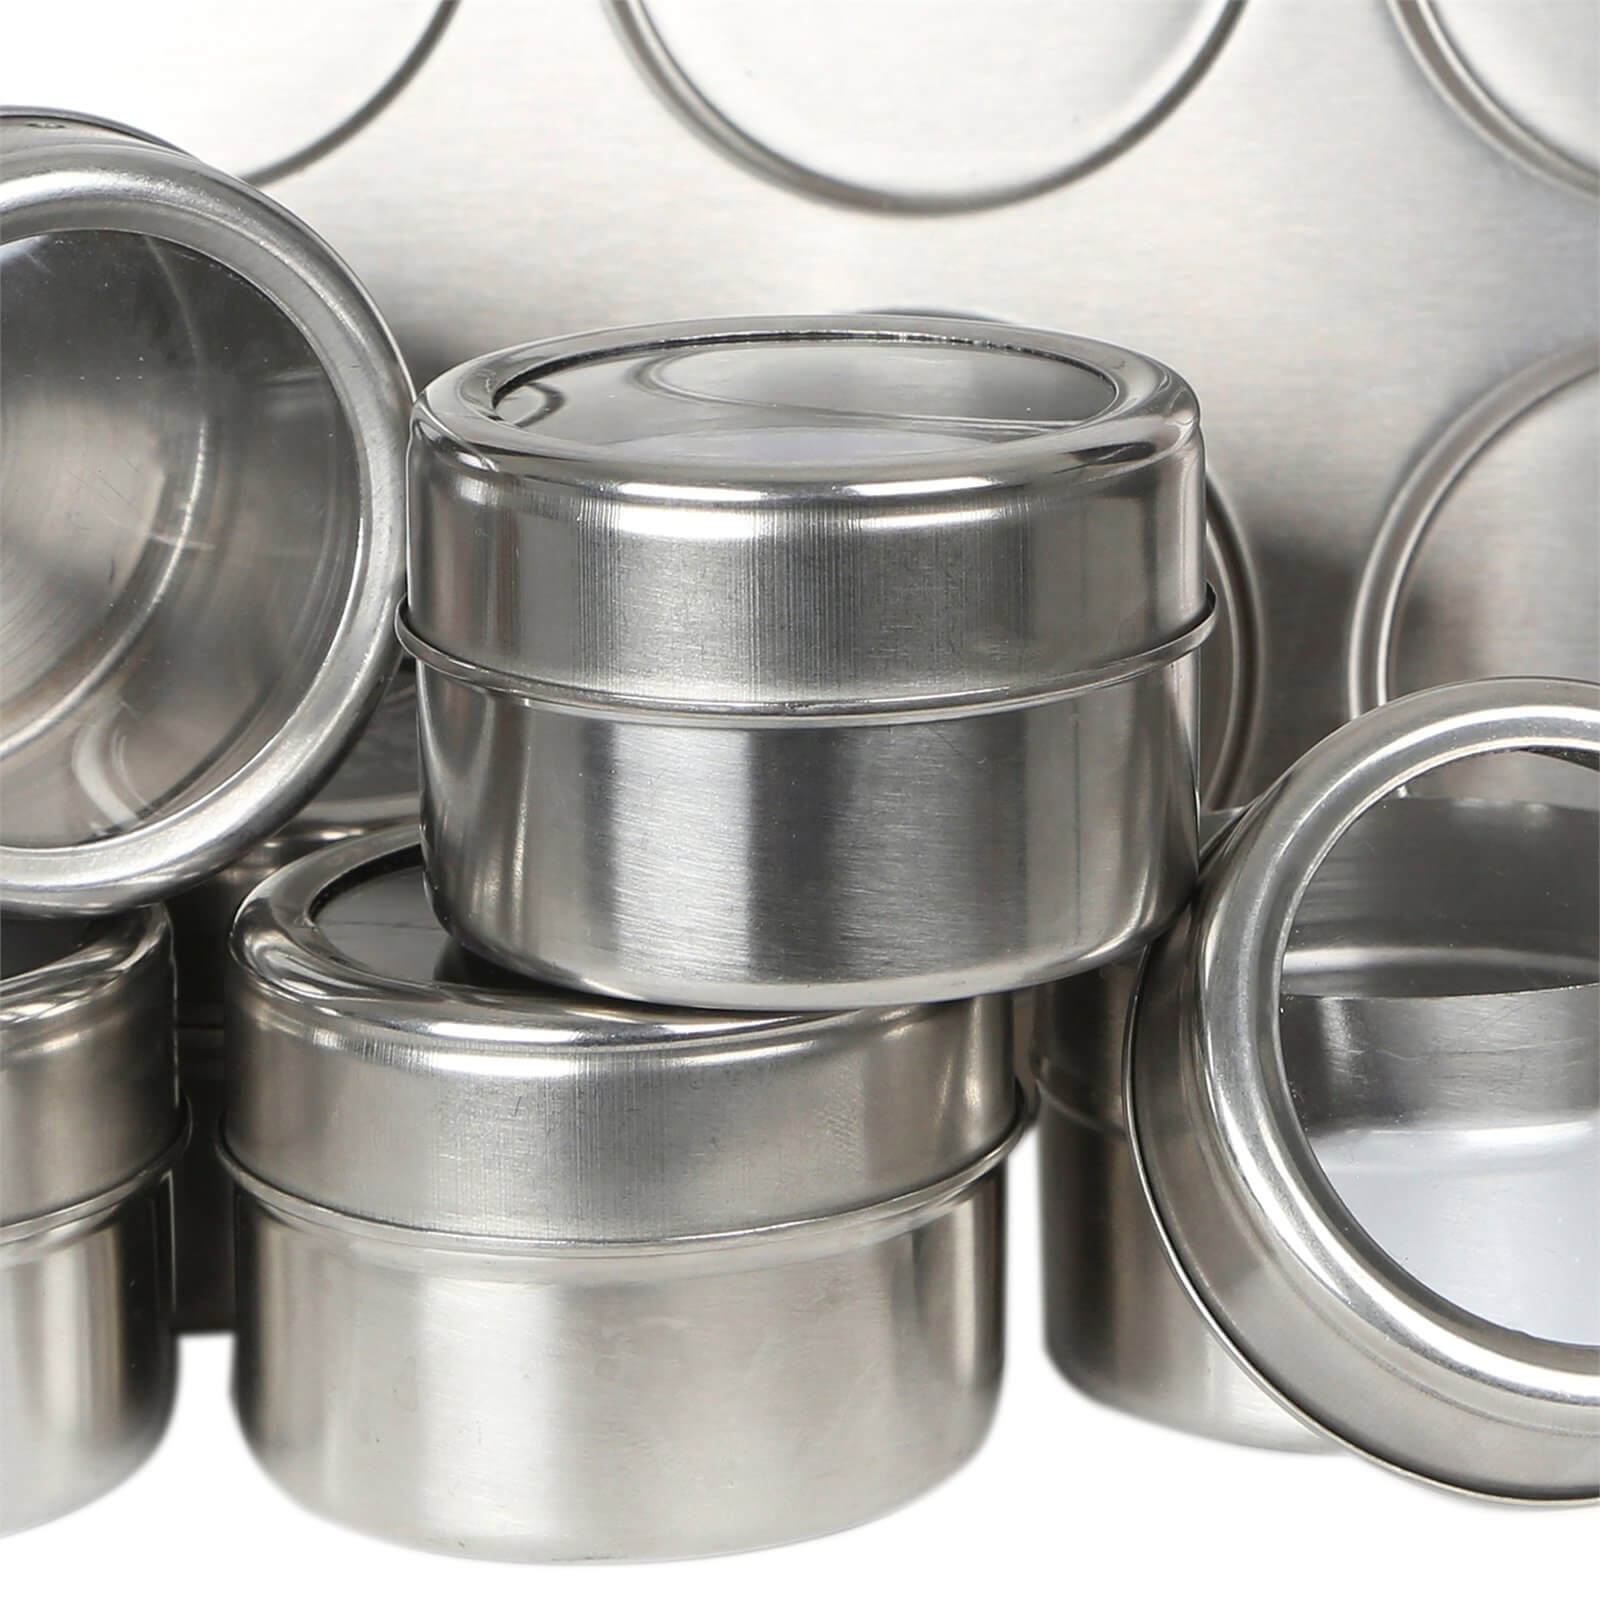 Magnetic Spice Jars with Oblong Tray